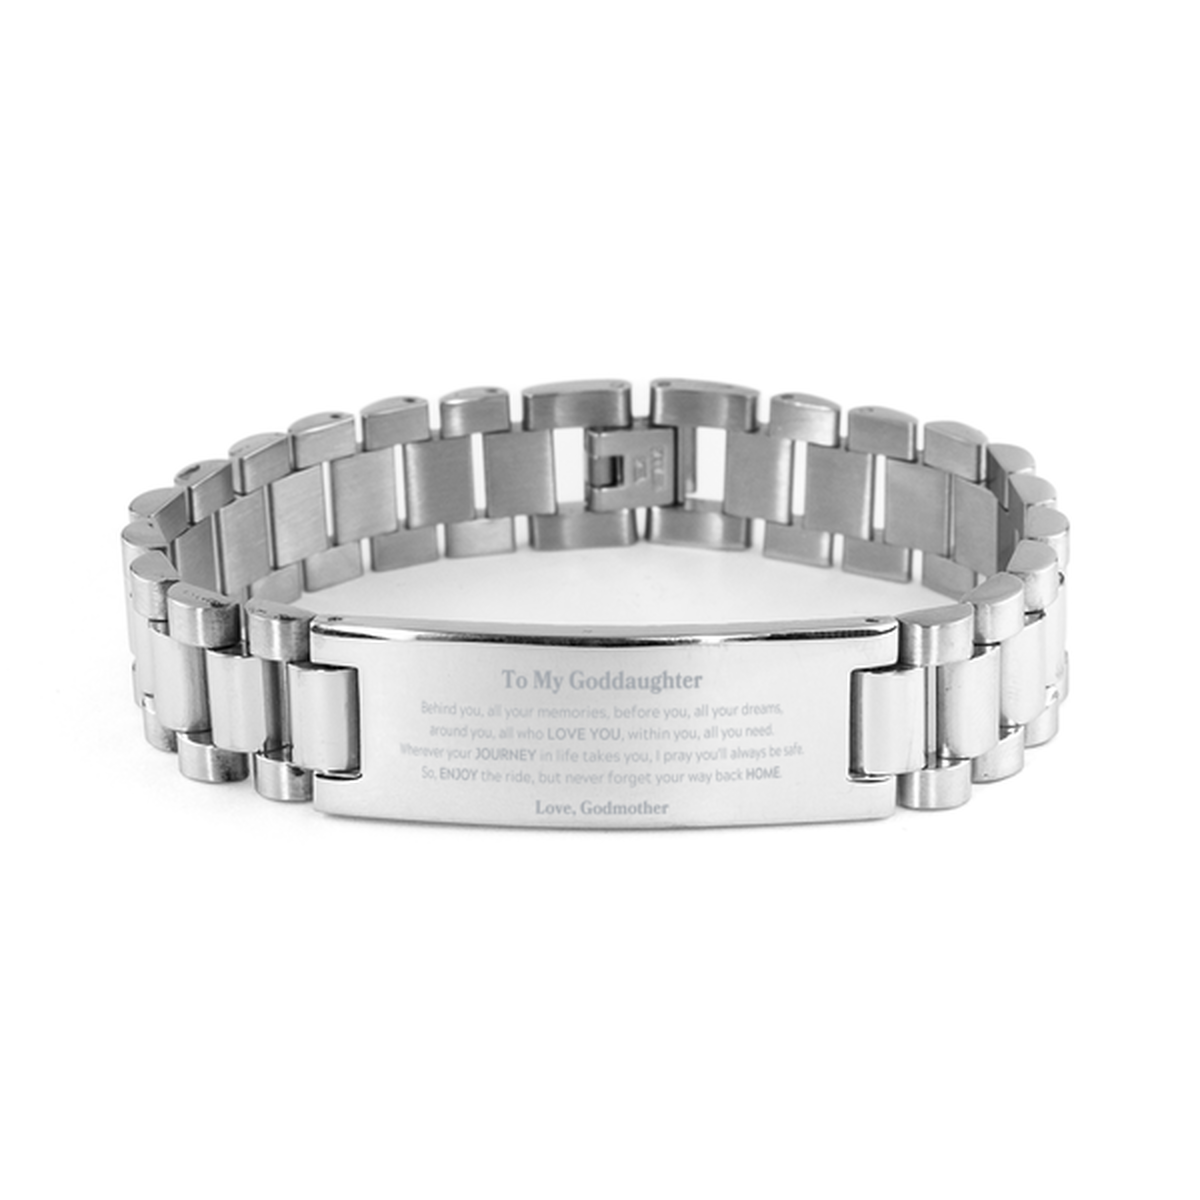 To My Goddaughter Graduation Gifts from Godmother, Goddaughter Ladder Stainless Steel Bracelet Christmas Birthday Gifts for Goddaughter Behind you, all your memories, before you, all your dreams. Love, Godmother